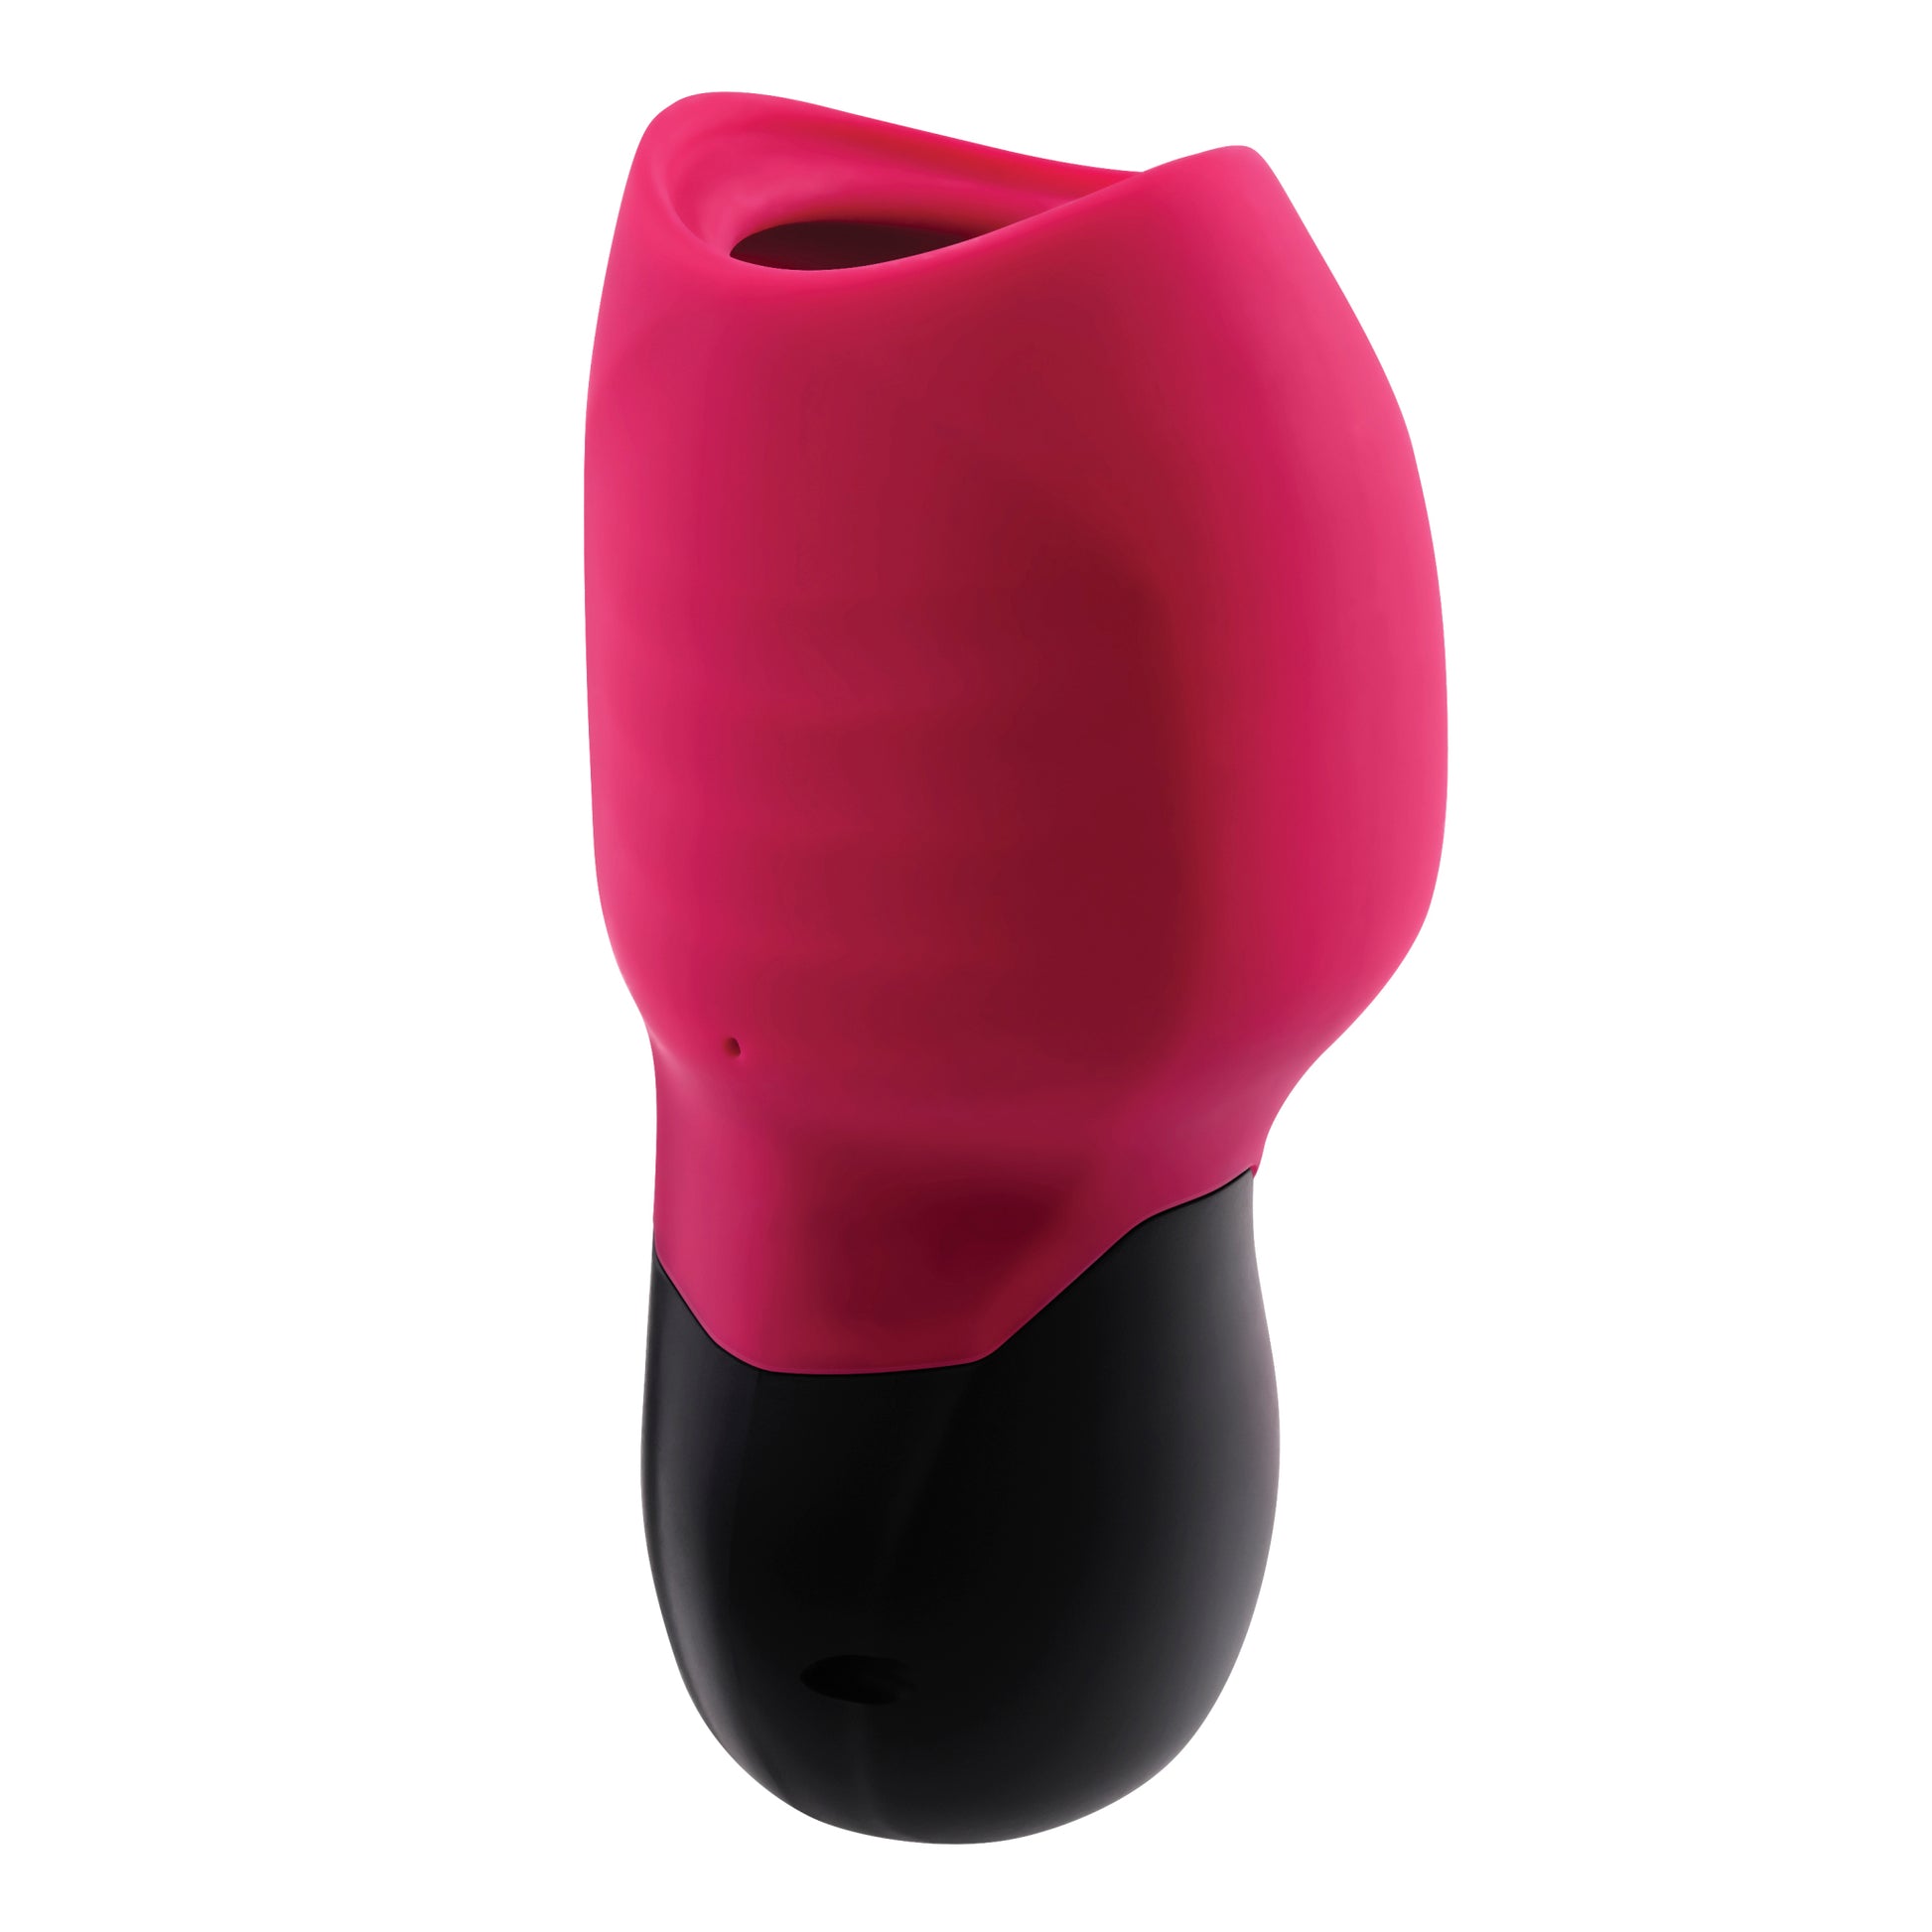 The back and side of the Body Kisses Vibrating Suction Massager.